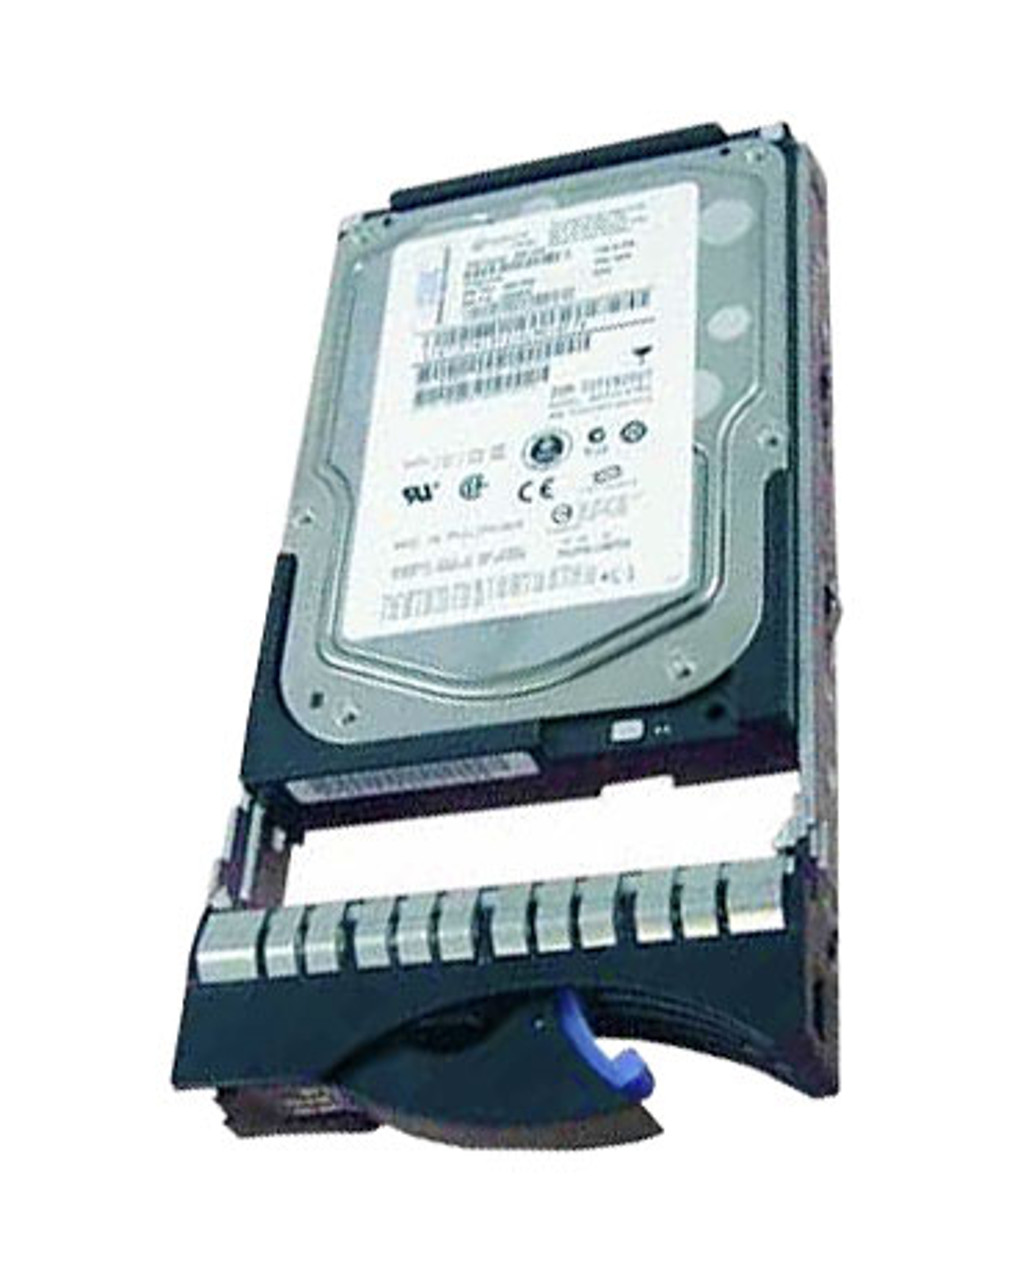 19K1473 - IBM 18.2GB 10000RPM Fibre Channel Hard Disk Drive with Hot Swapable Tray